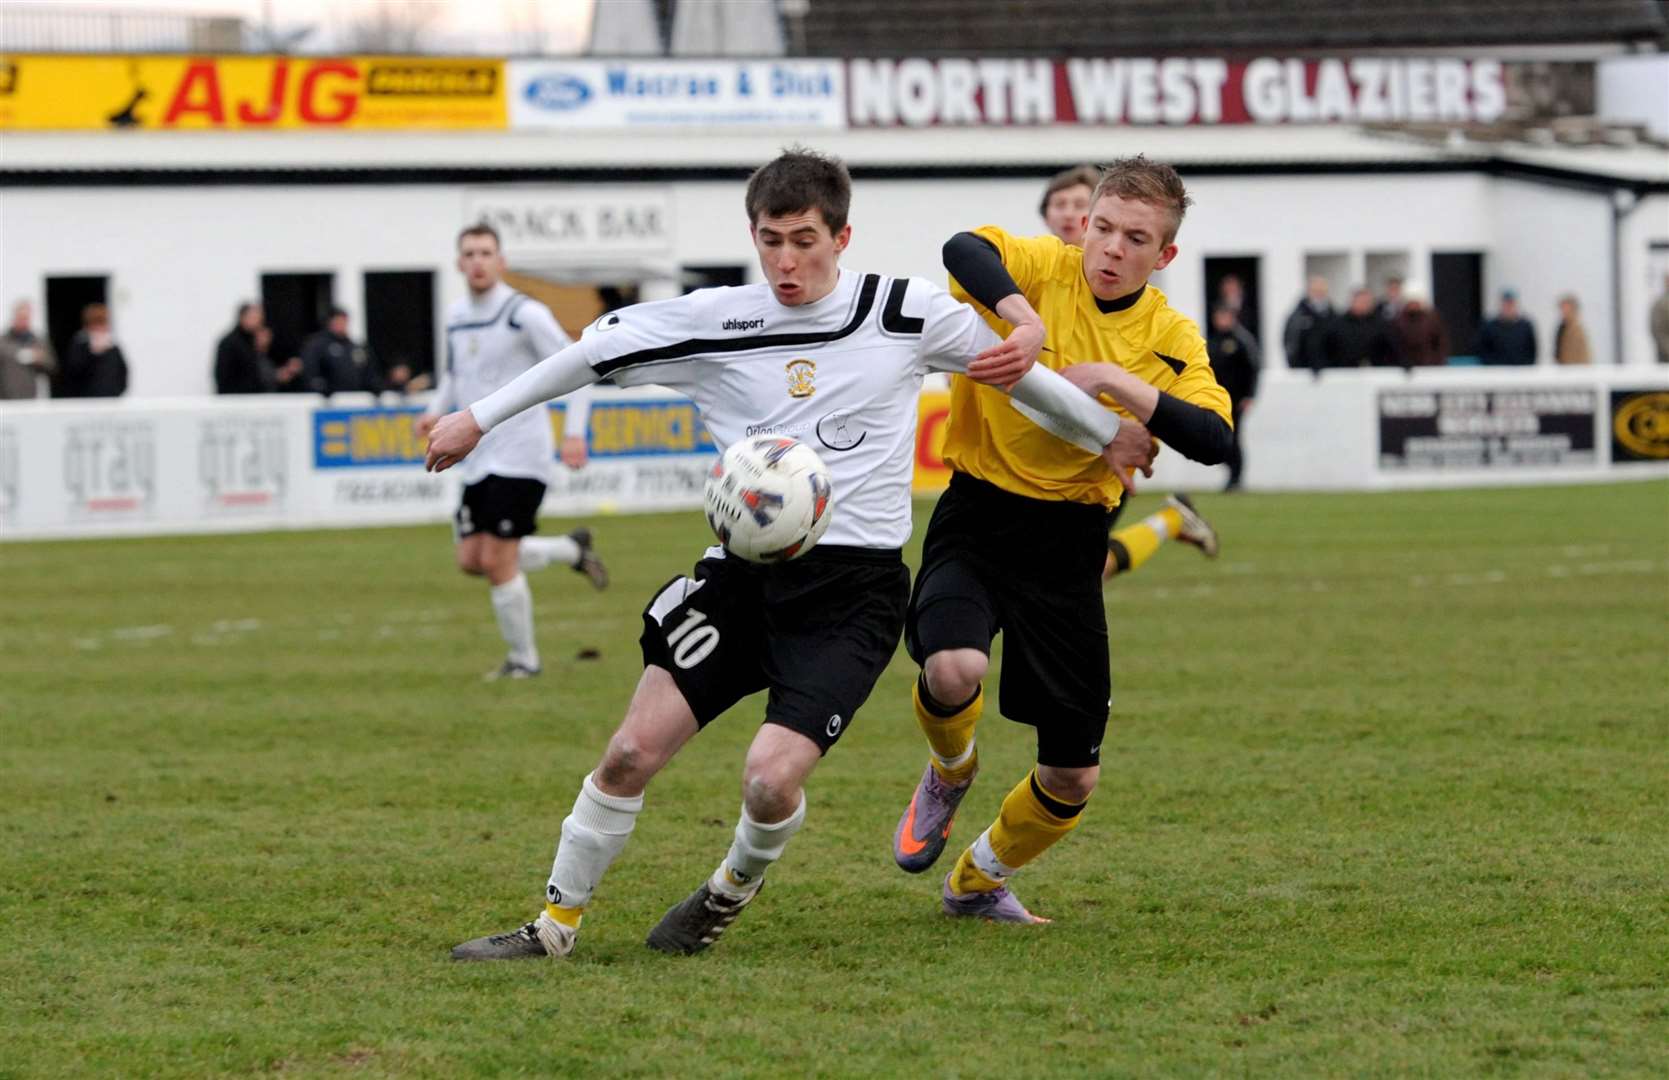 Blair Lawrie, here in 2011 derby action against Nairn, has given incredible service to Clach – and is still going strong.